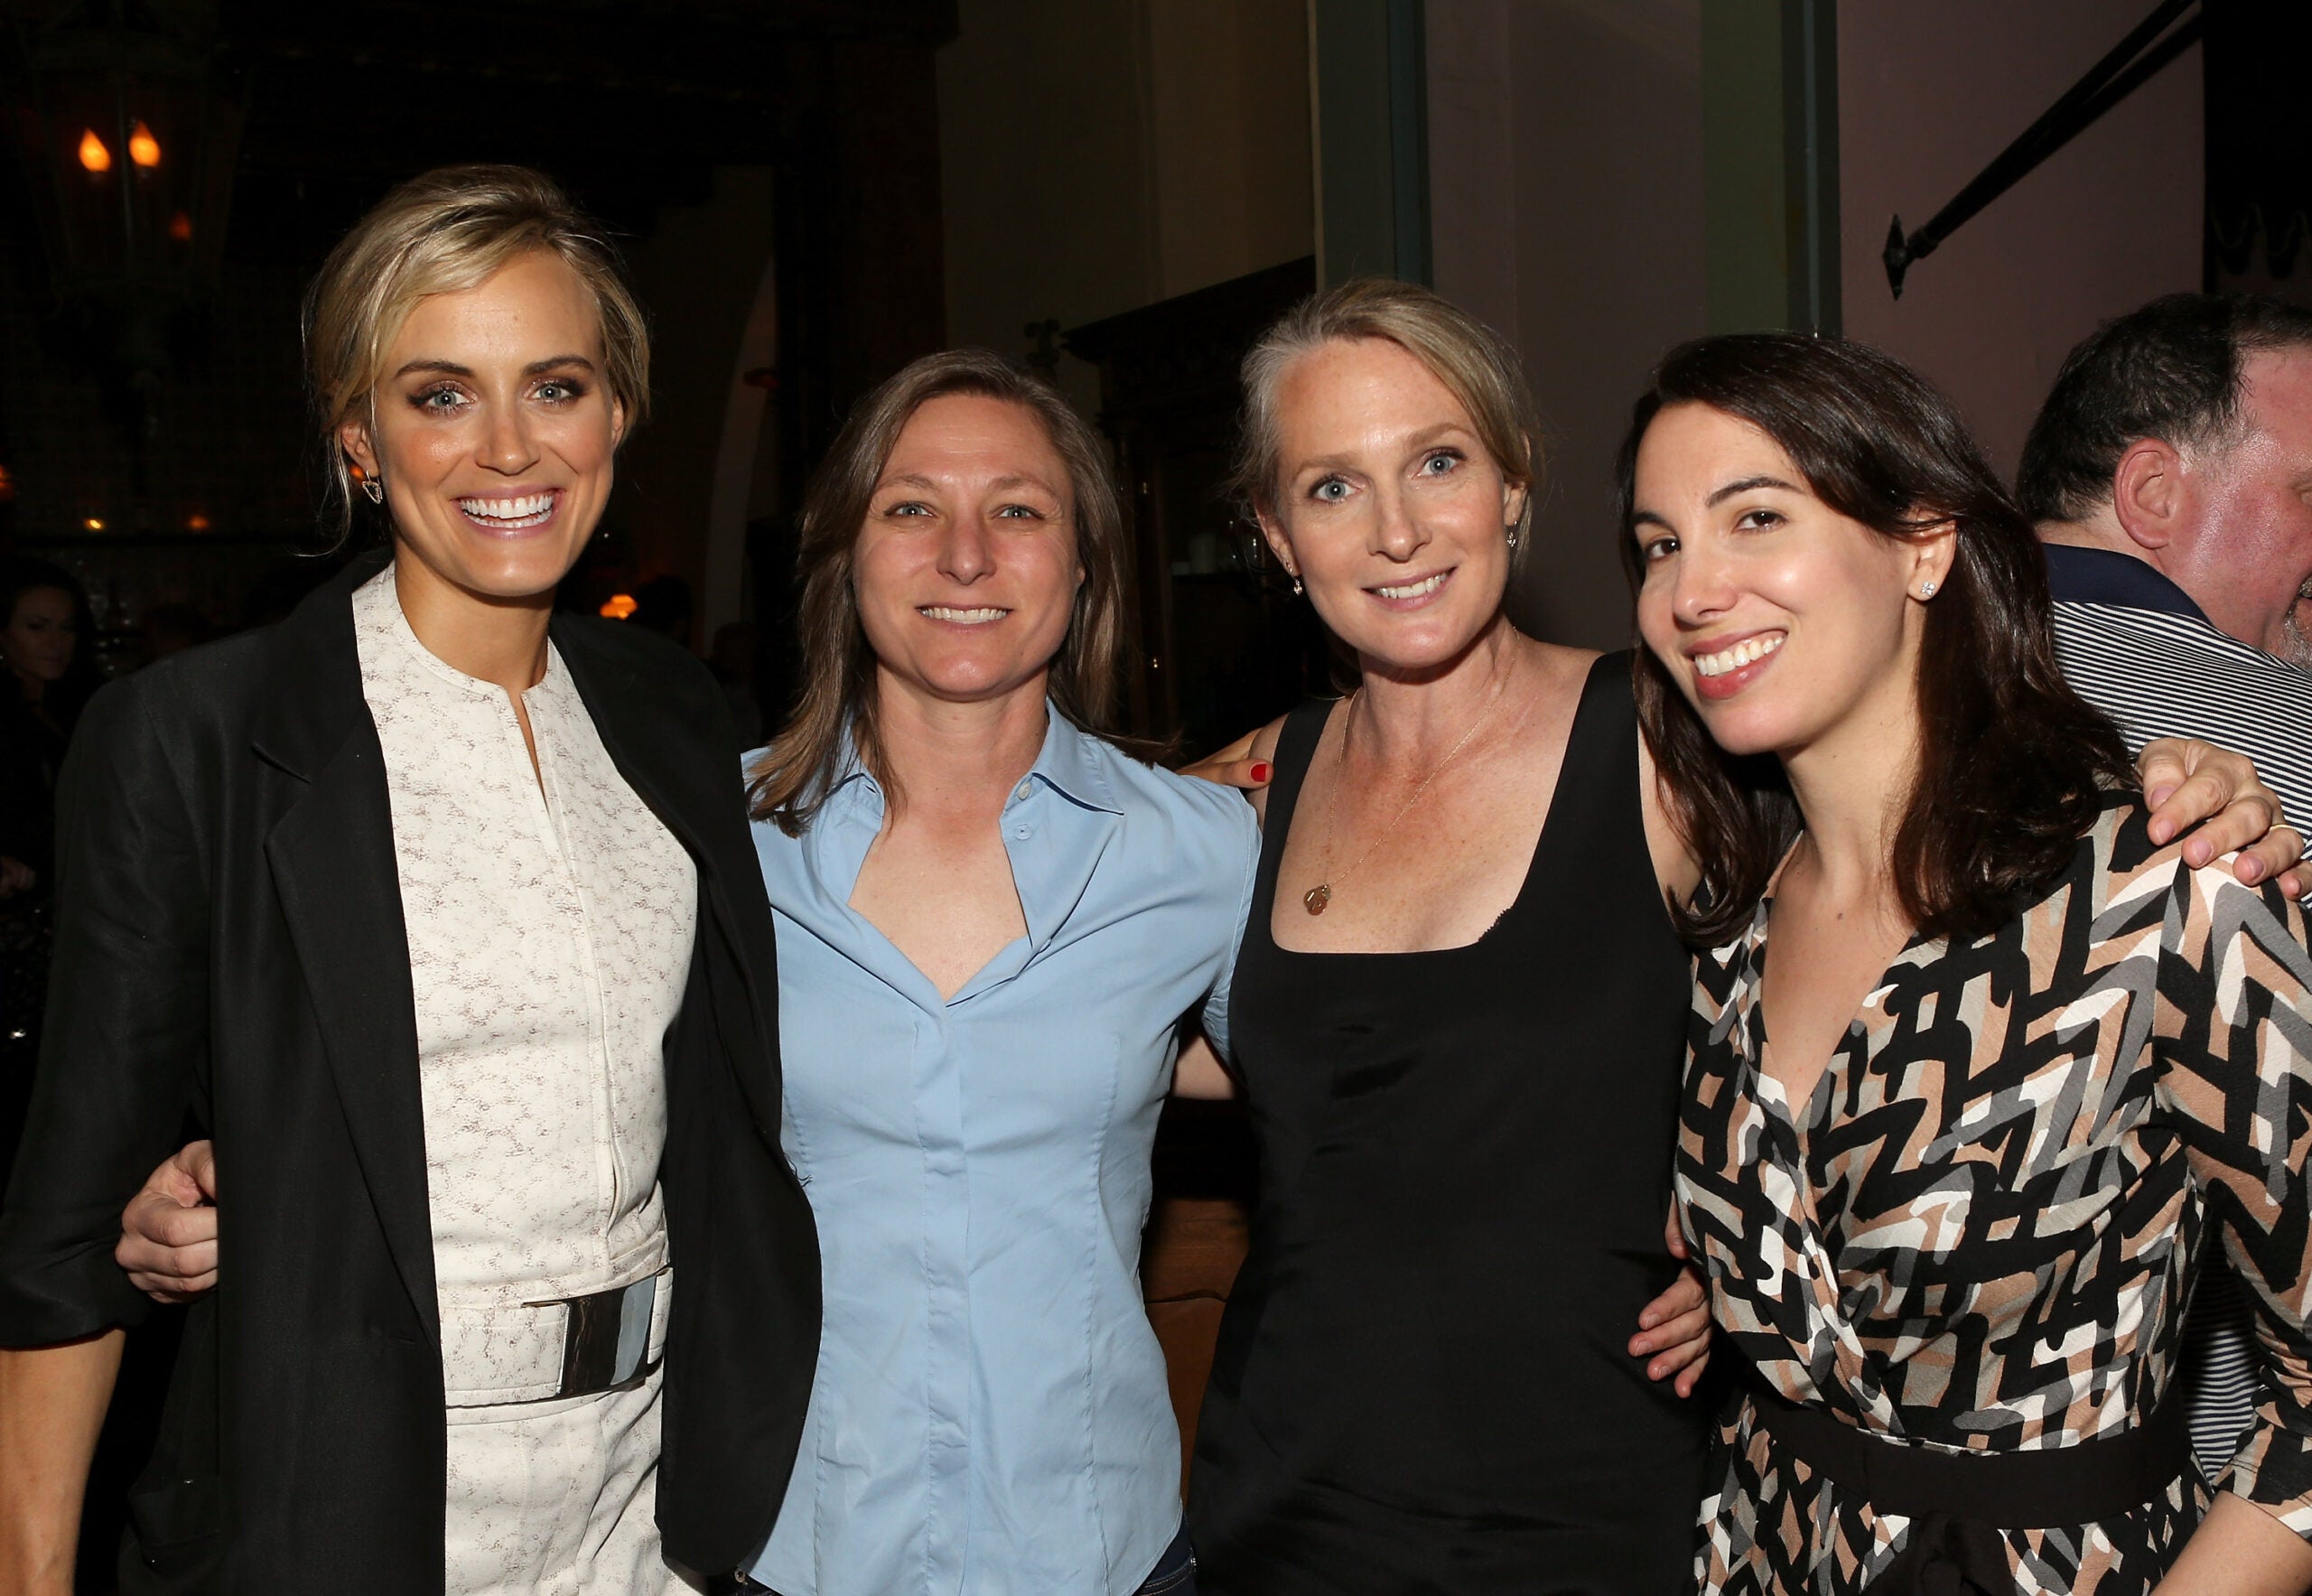 Waylands Taylor Schilling And Smiths Piper Kerman Celebrate Orange Is The New Black